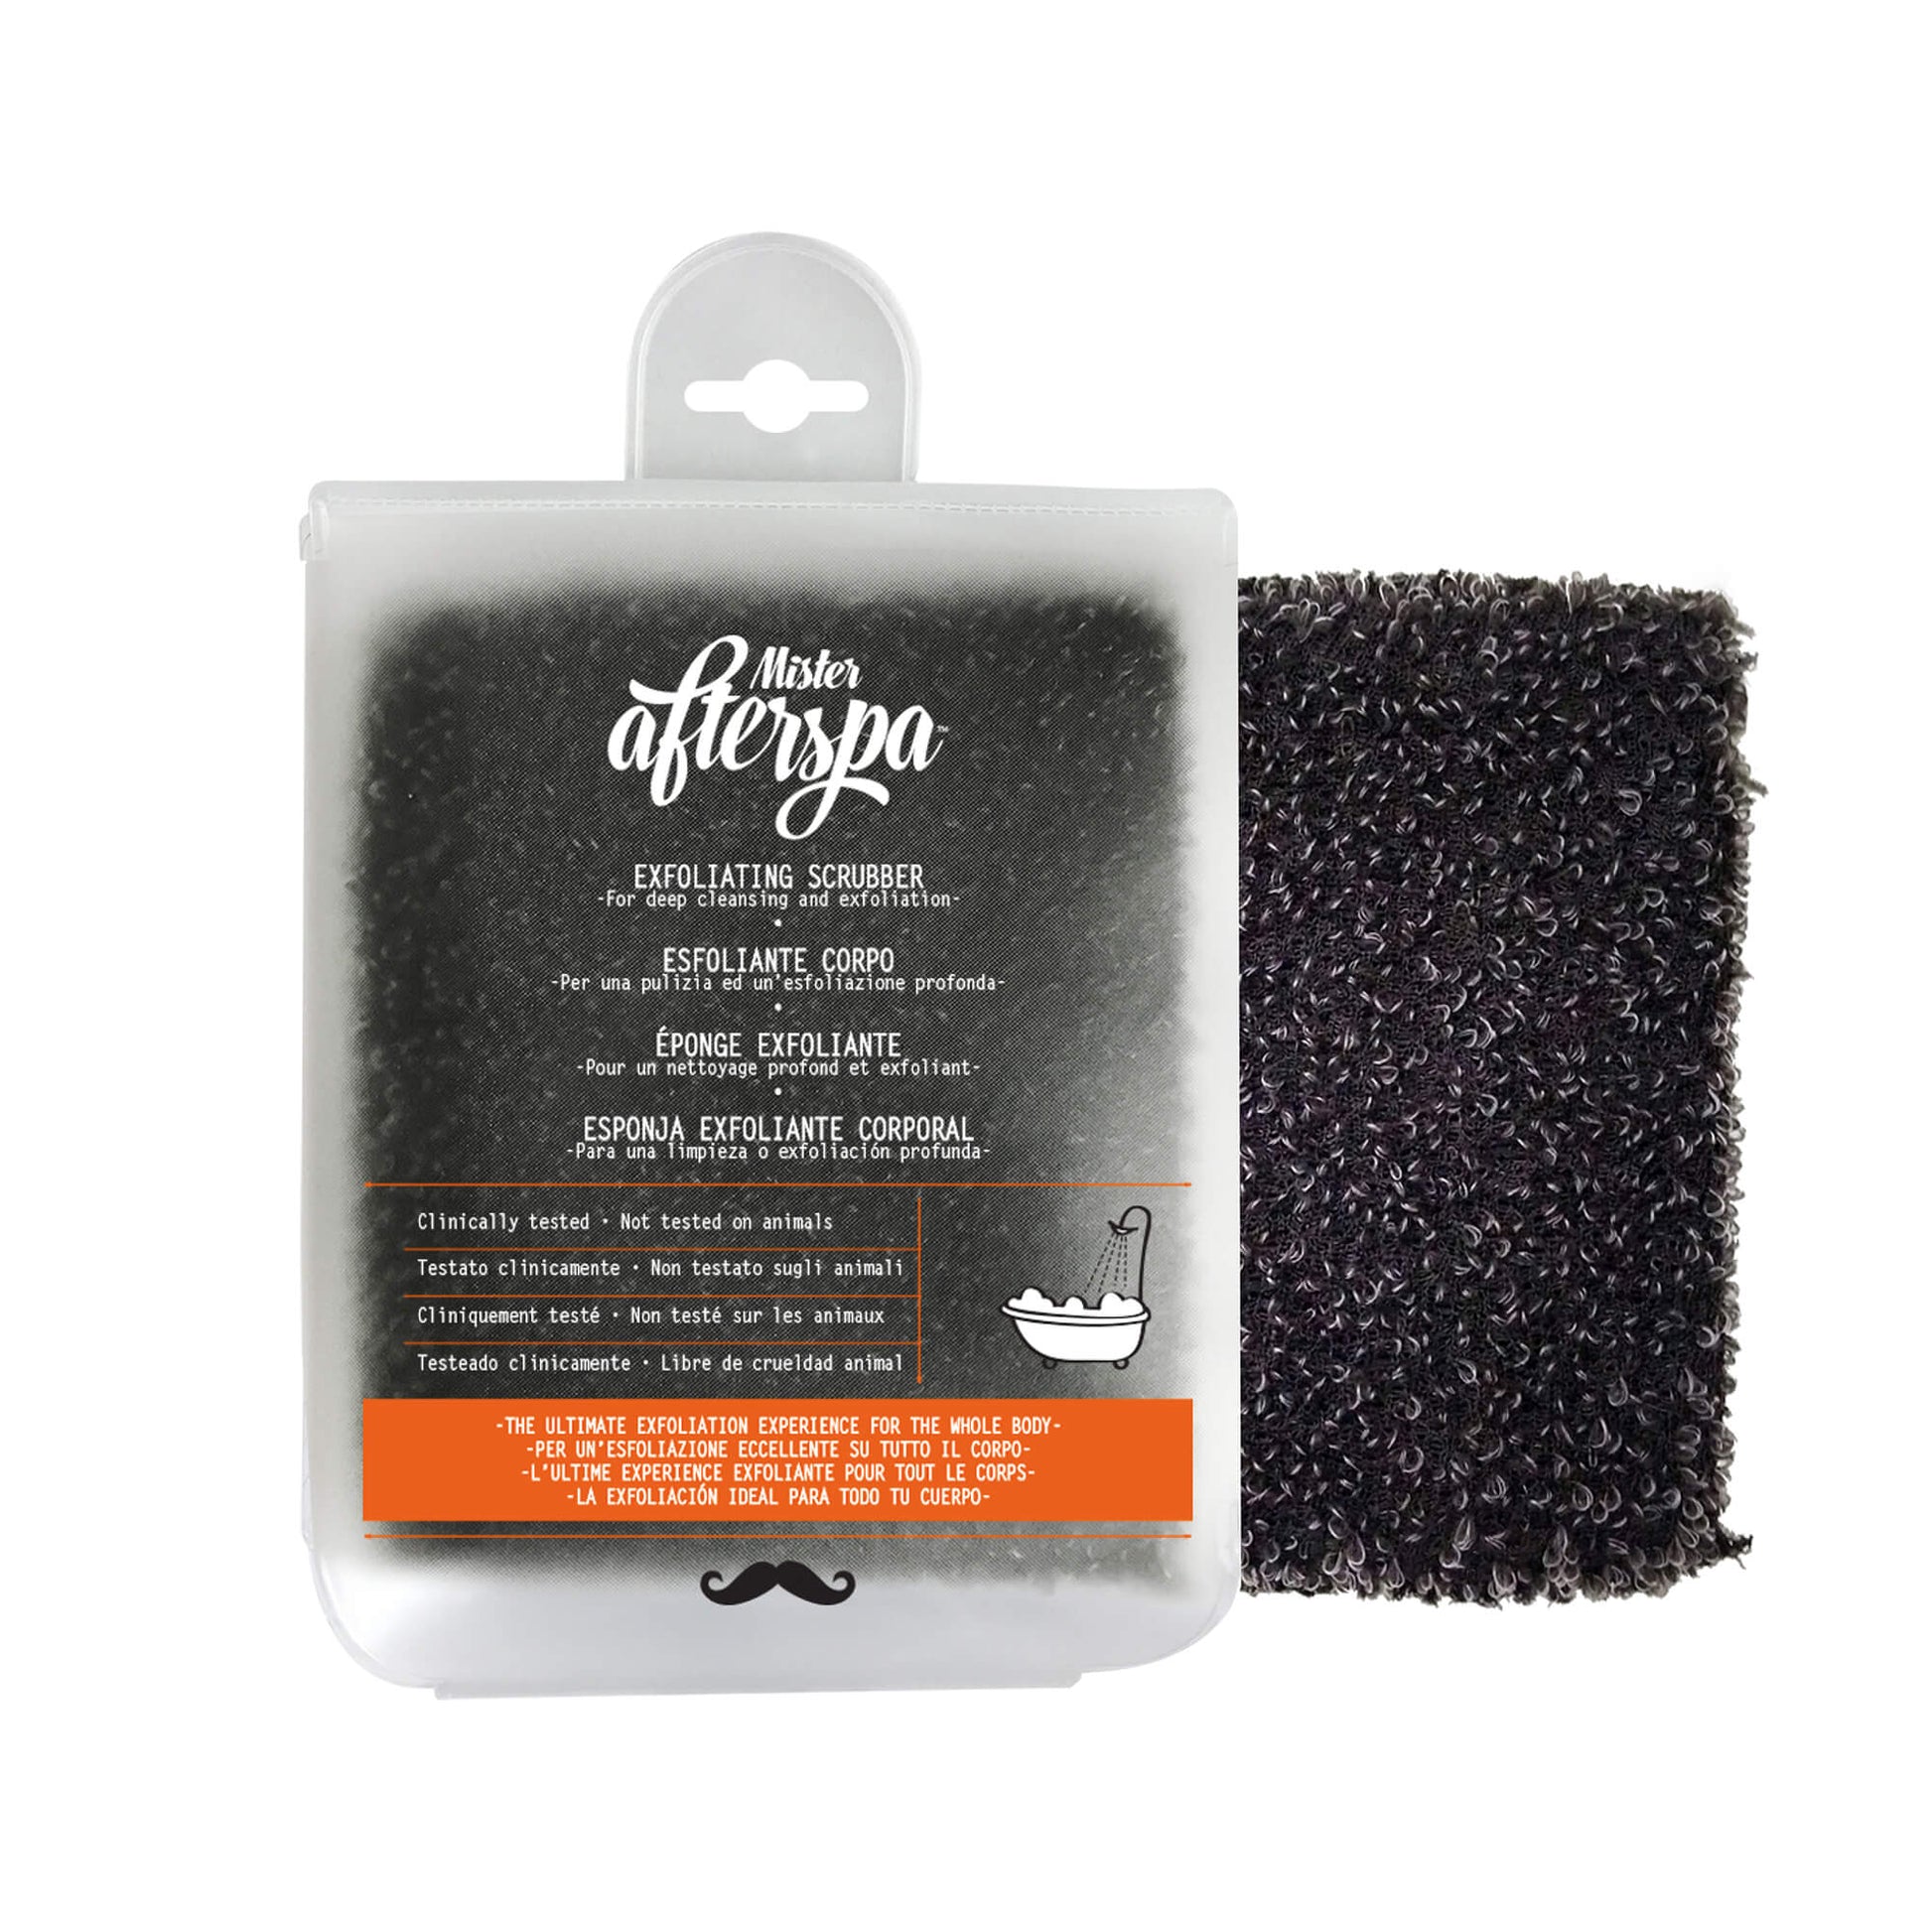 Mr Afterspa Body Scrubber - Afterspa -  Spa experience at home